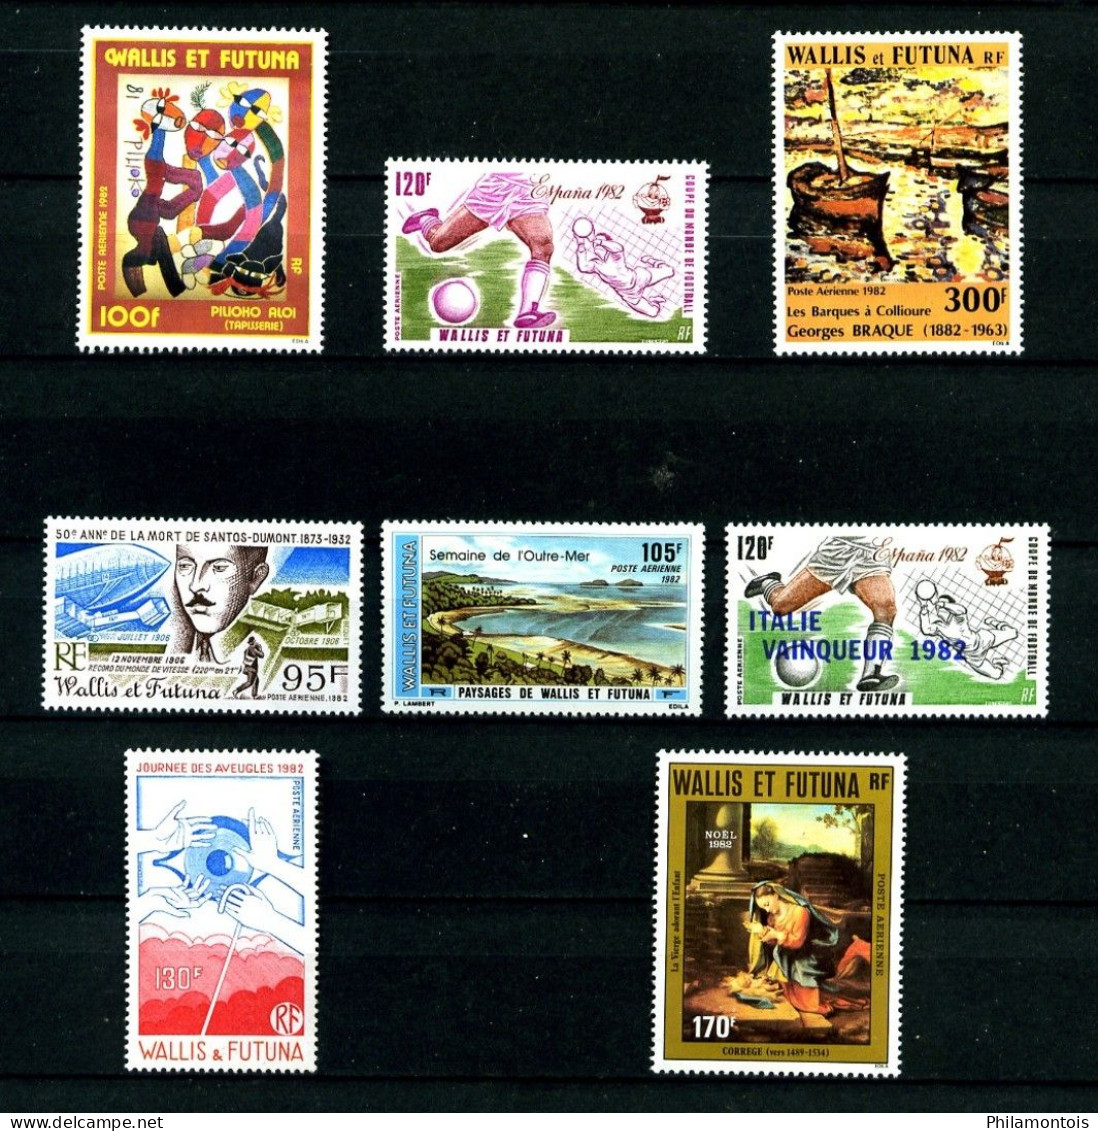 WALLIS - Année Complète PA 1982 - PA 114/121 - Complet 8 Timbres - Neufs N** - Très Beaux (certains Gomme Mate) - Full Years